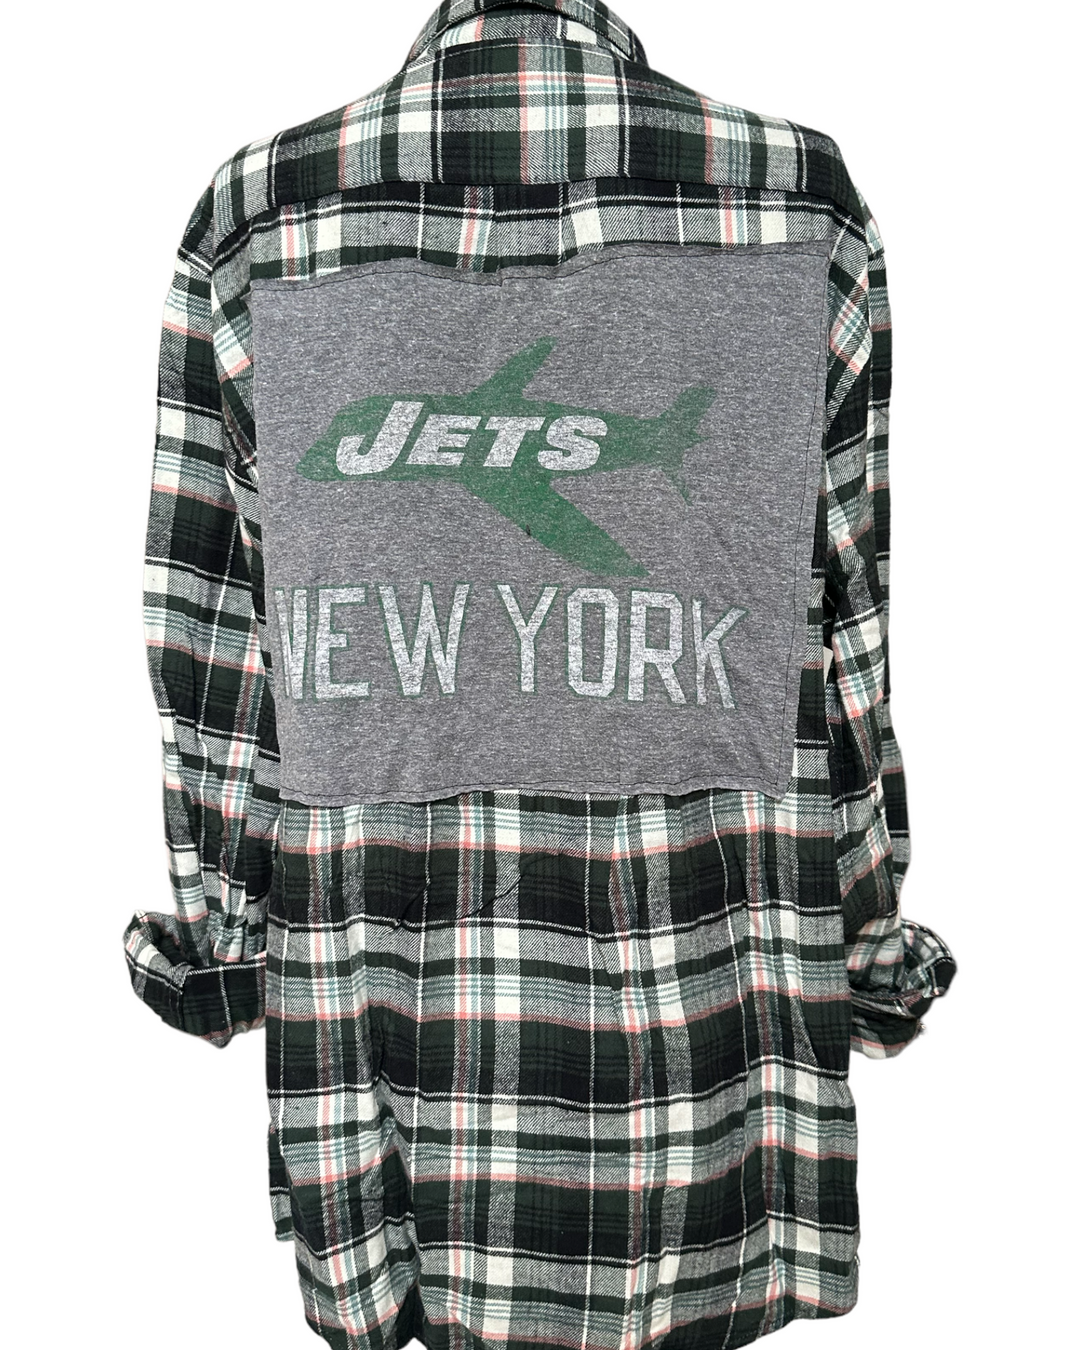 Jets Patched Flannel